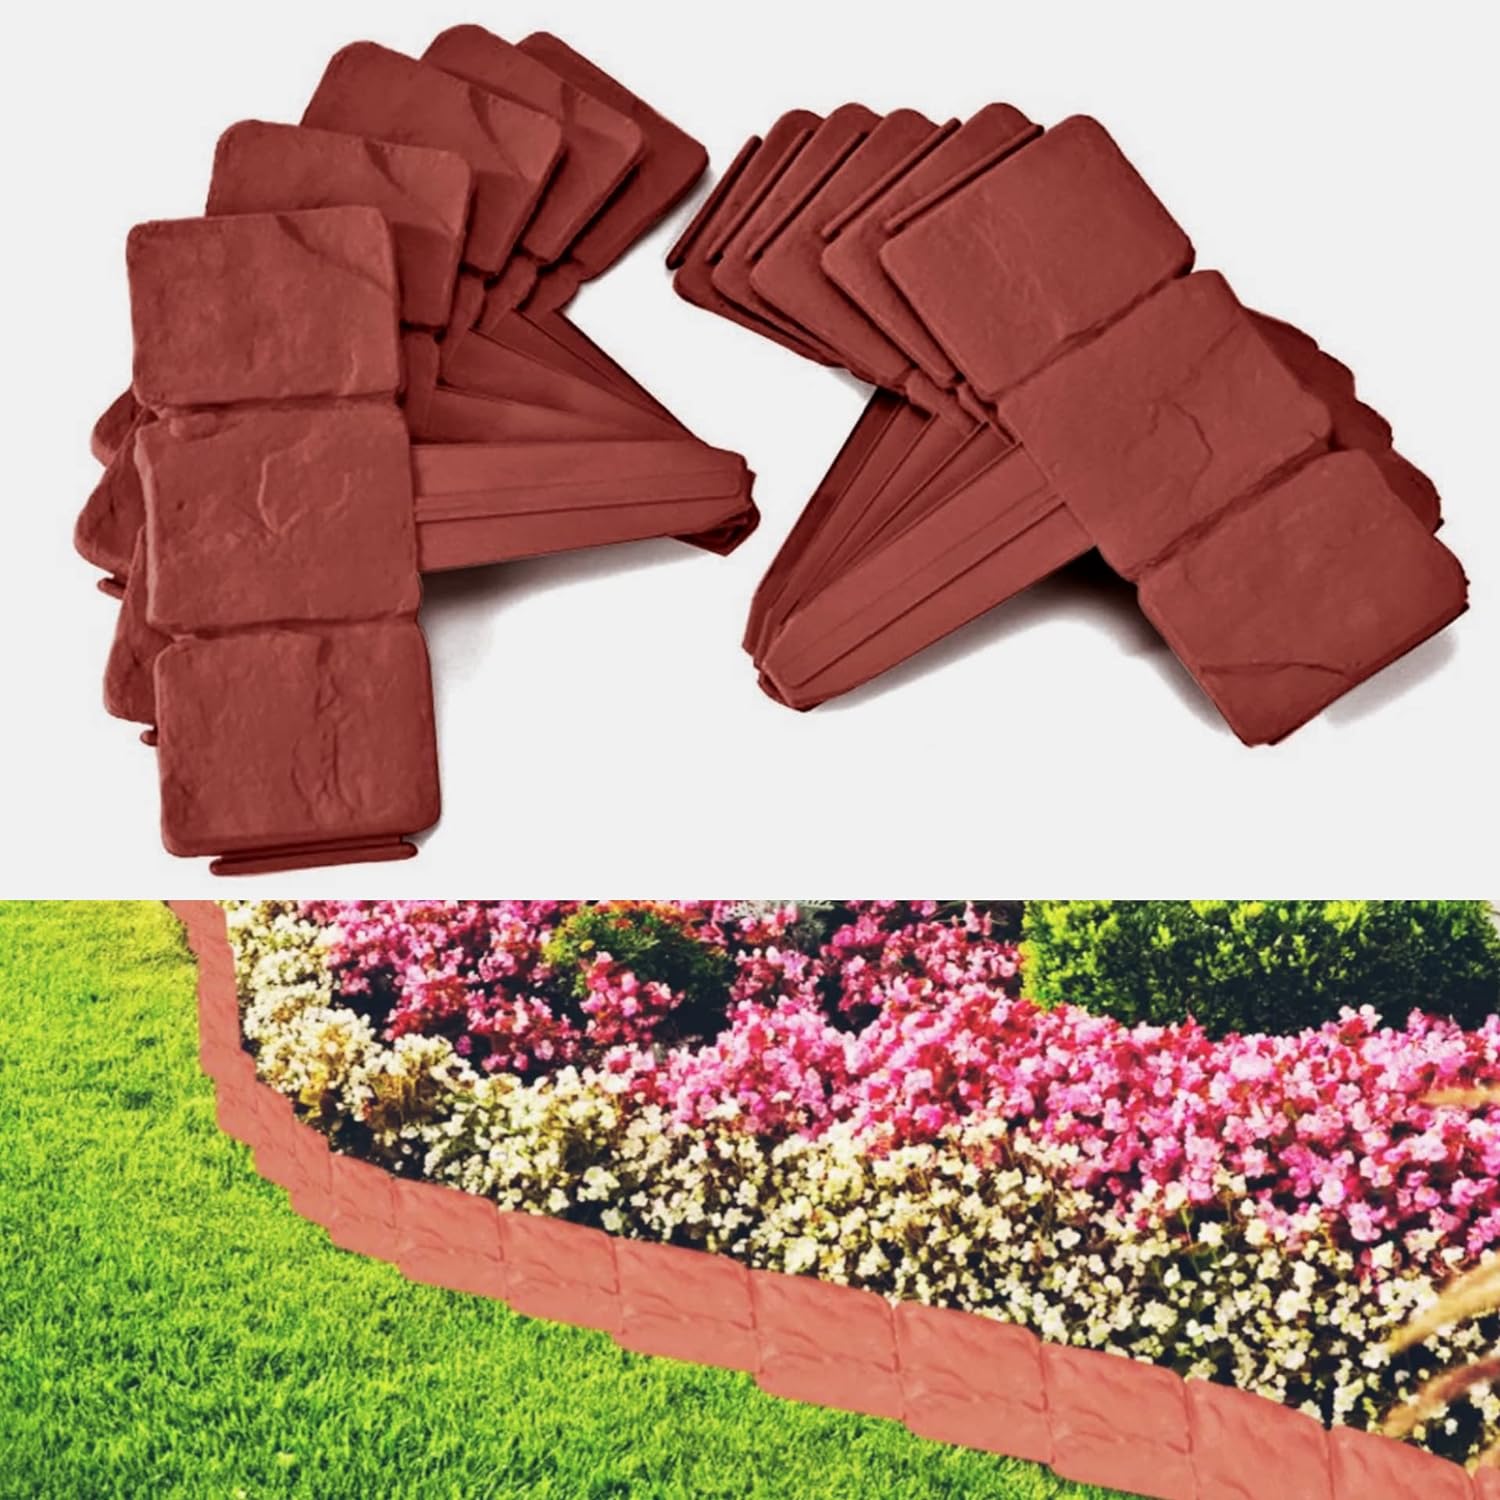 ADEPTNA 20 Pack Interlocking Garden Edging Cobbled Stone Effect Plastic Lawn Plant Border Just Hammer IN – Ideal for Borders Flowerbeds Paths and Lawns – Create Any Shape Up to 16ft Long